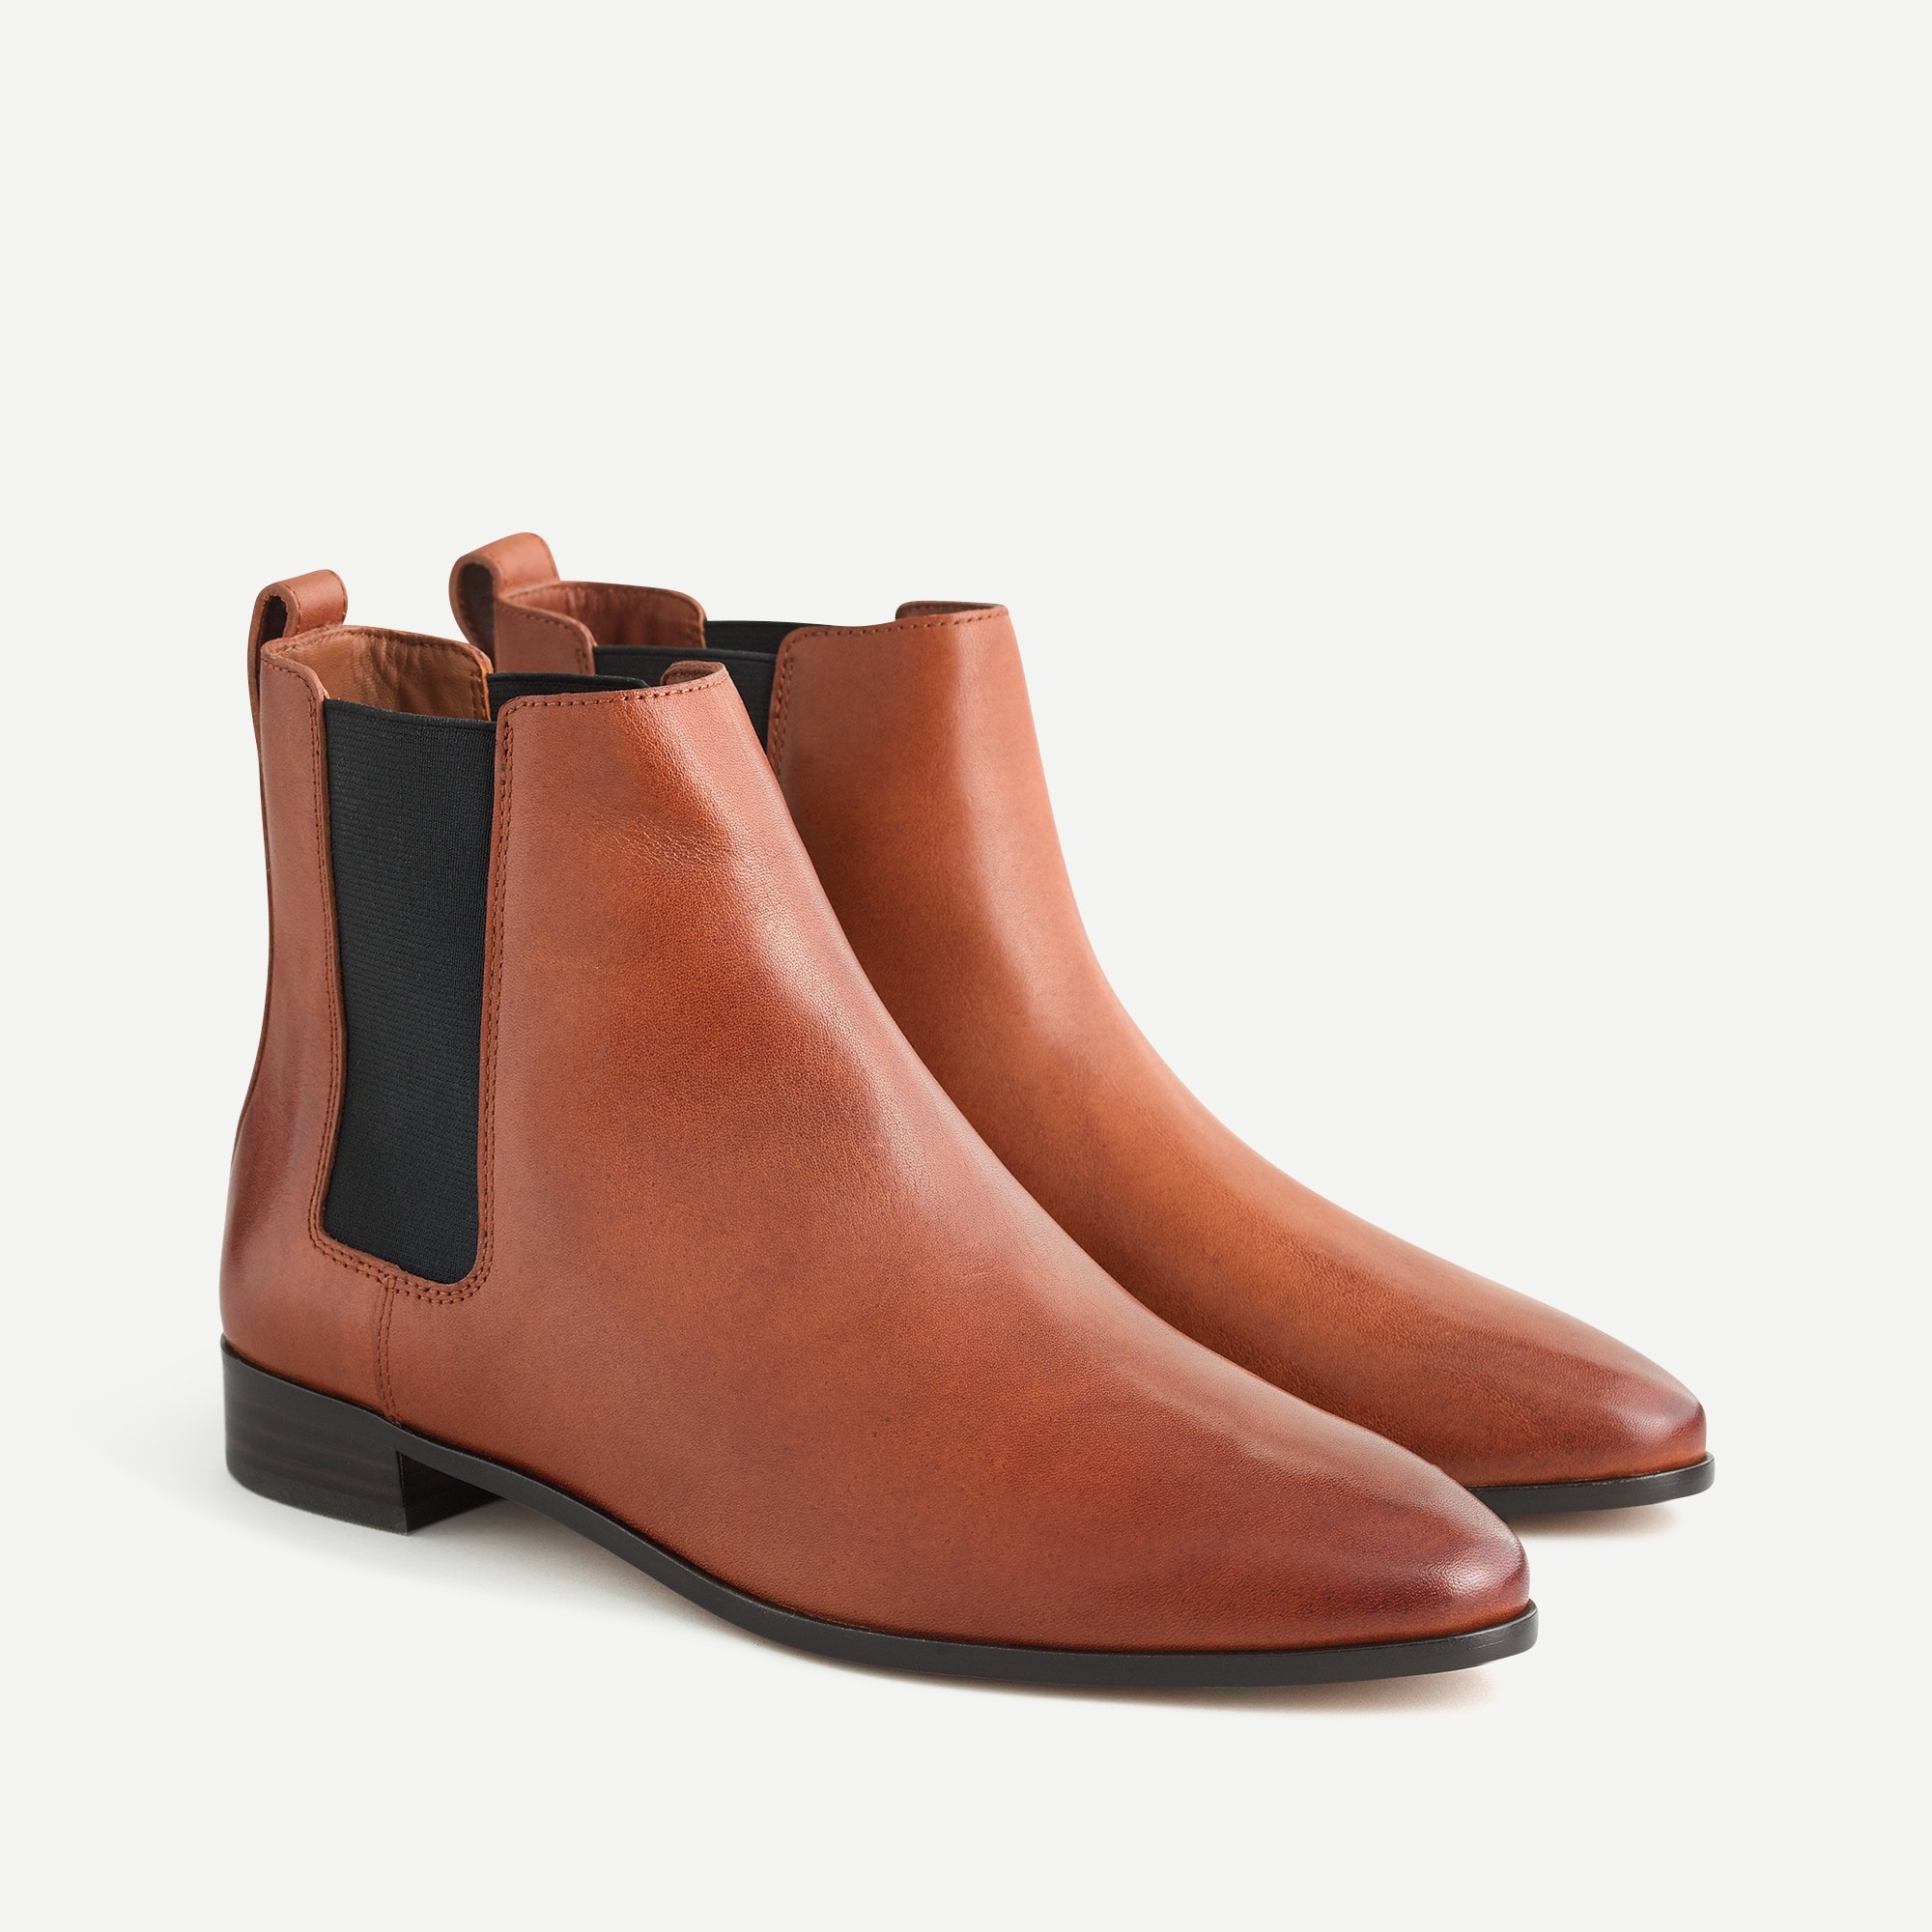 stores that sell chelsea boots